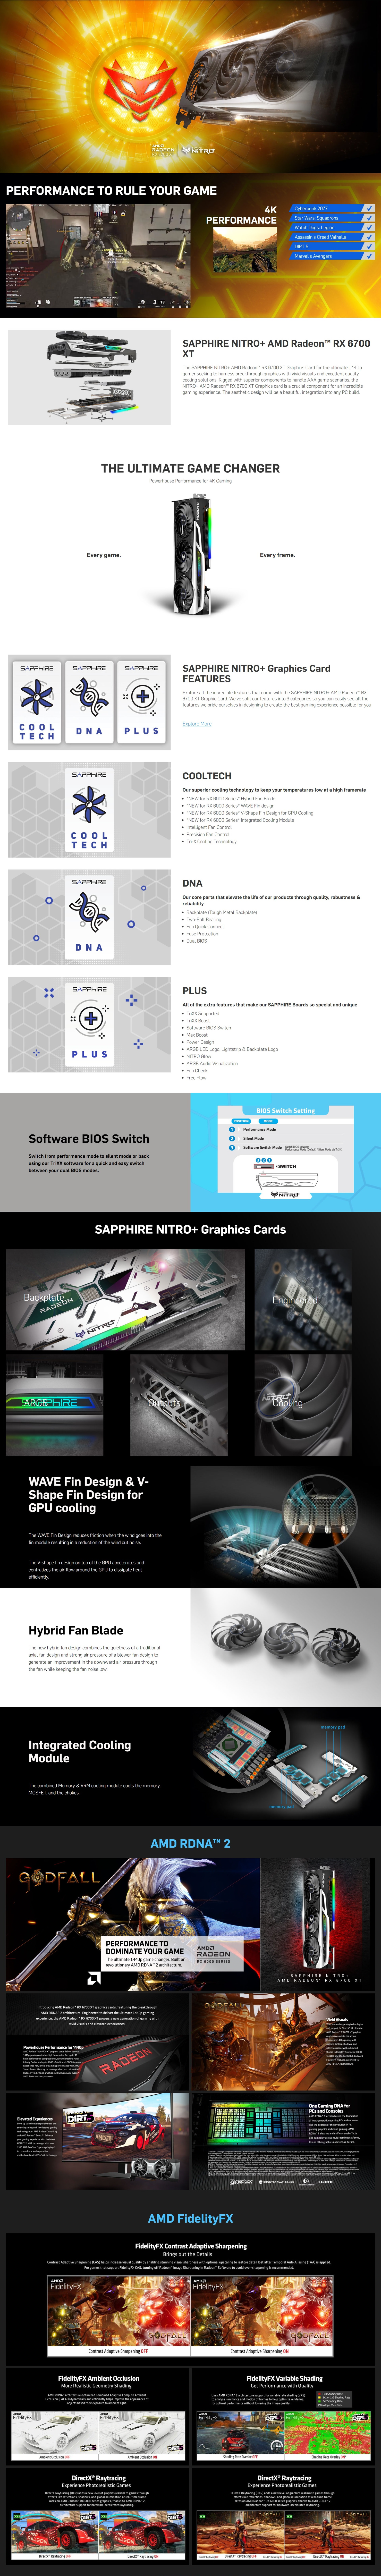 A large marketing image providing additional information about the product Sapphire Radeon RX 6700 XT Nitro+ Gaming OC 12GB DDR6 - Additional alt info not provided